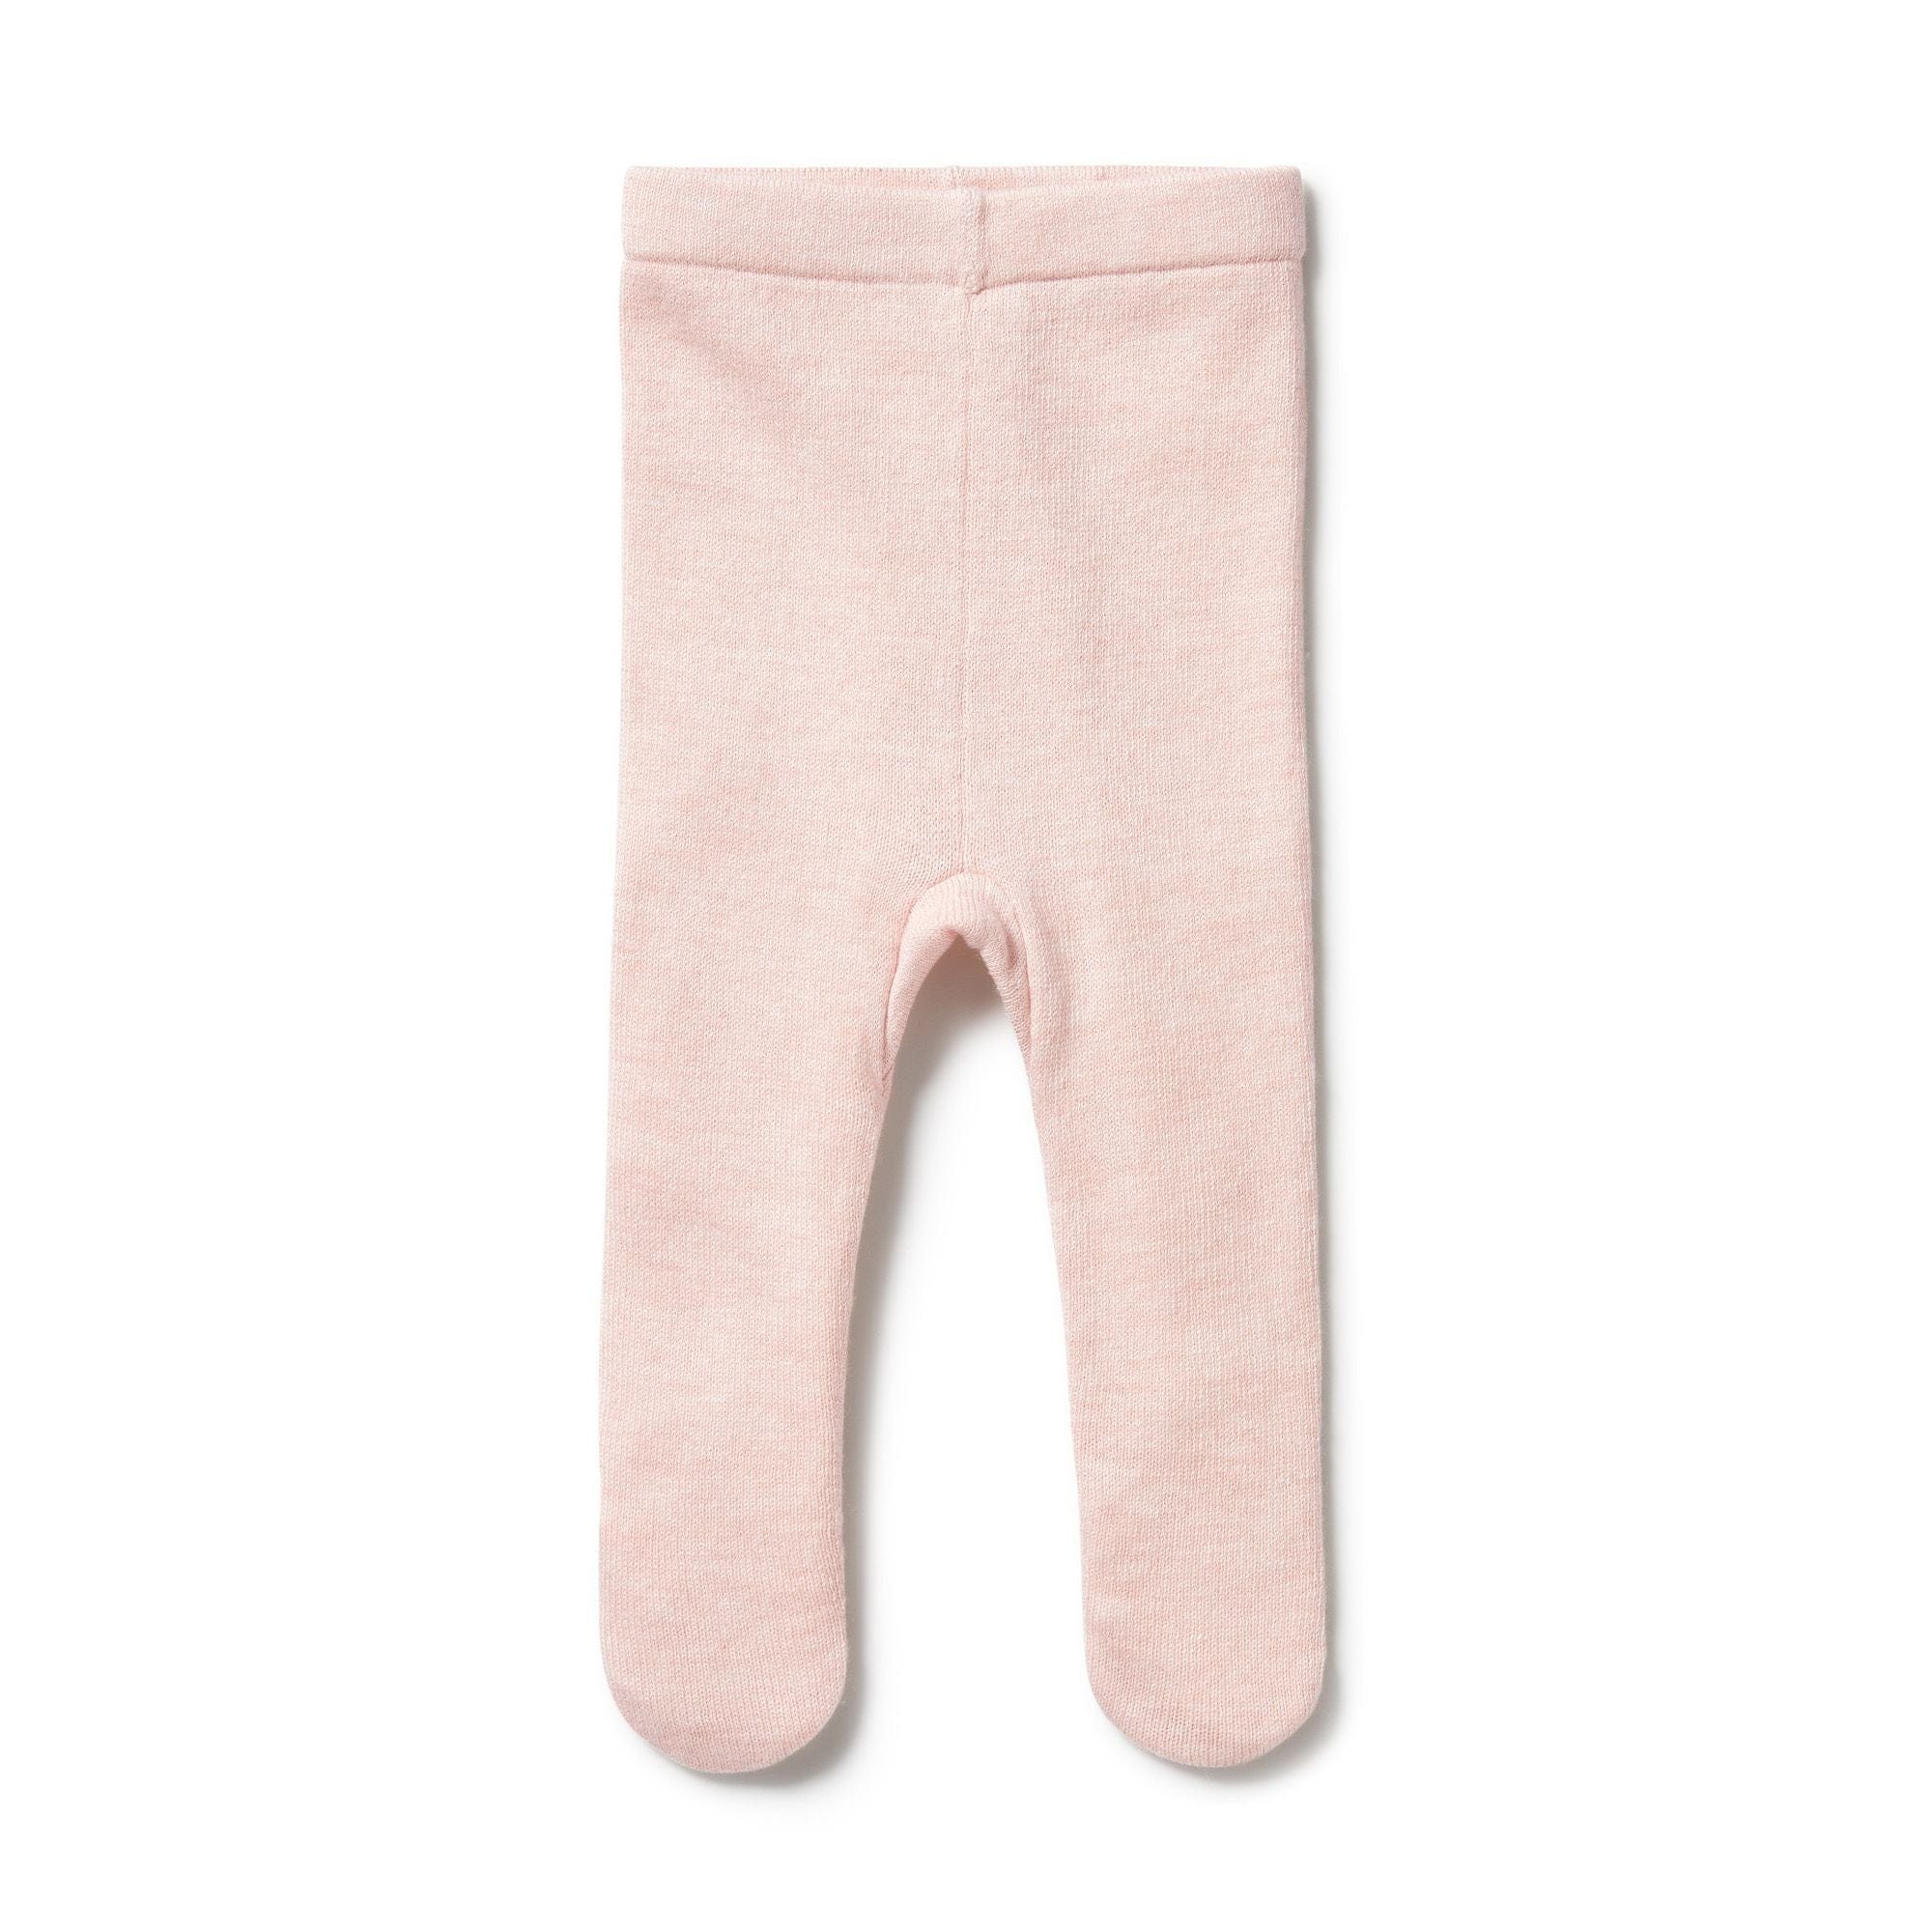 Wilson & Frenchy Girls Pants Pink Knitted Legging with Feet